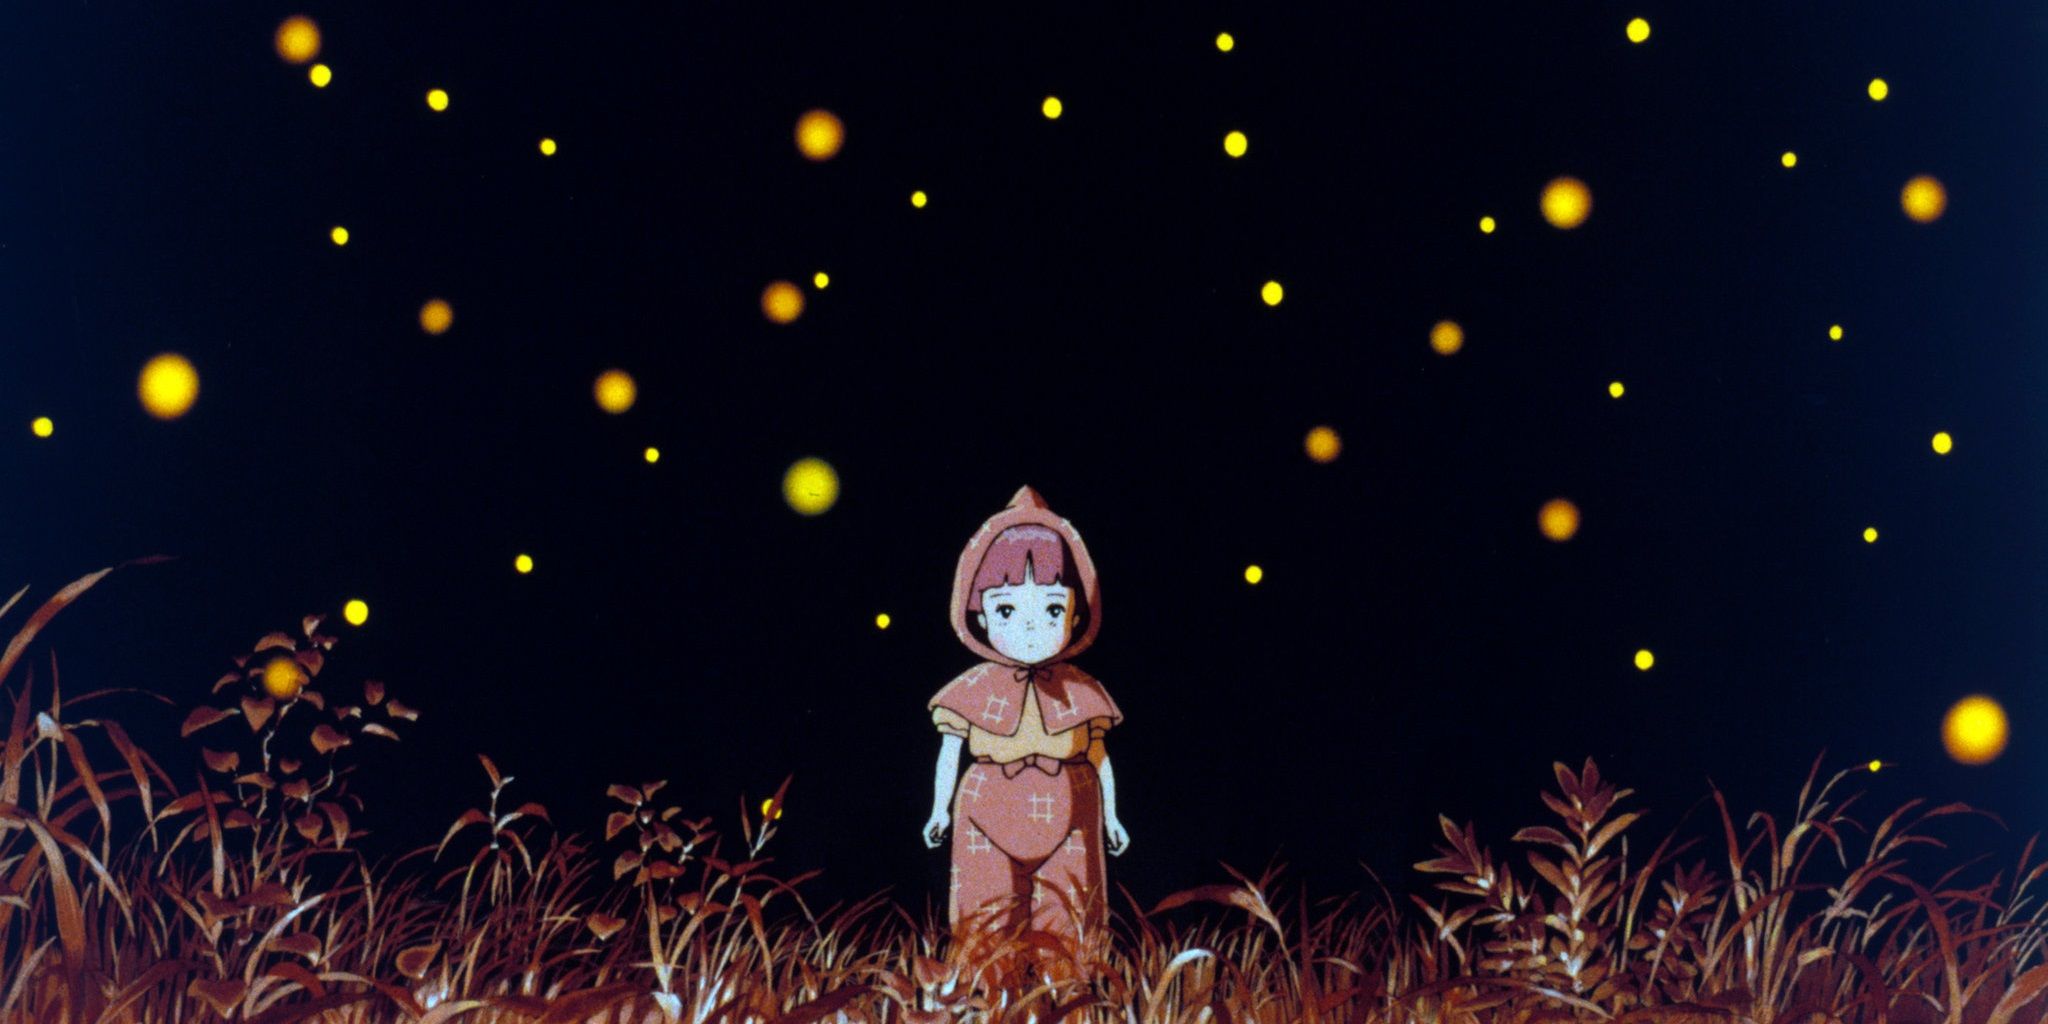 Setsuko standing among the fireflies in Grave of the Fireflies